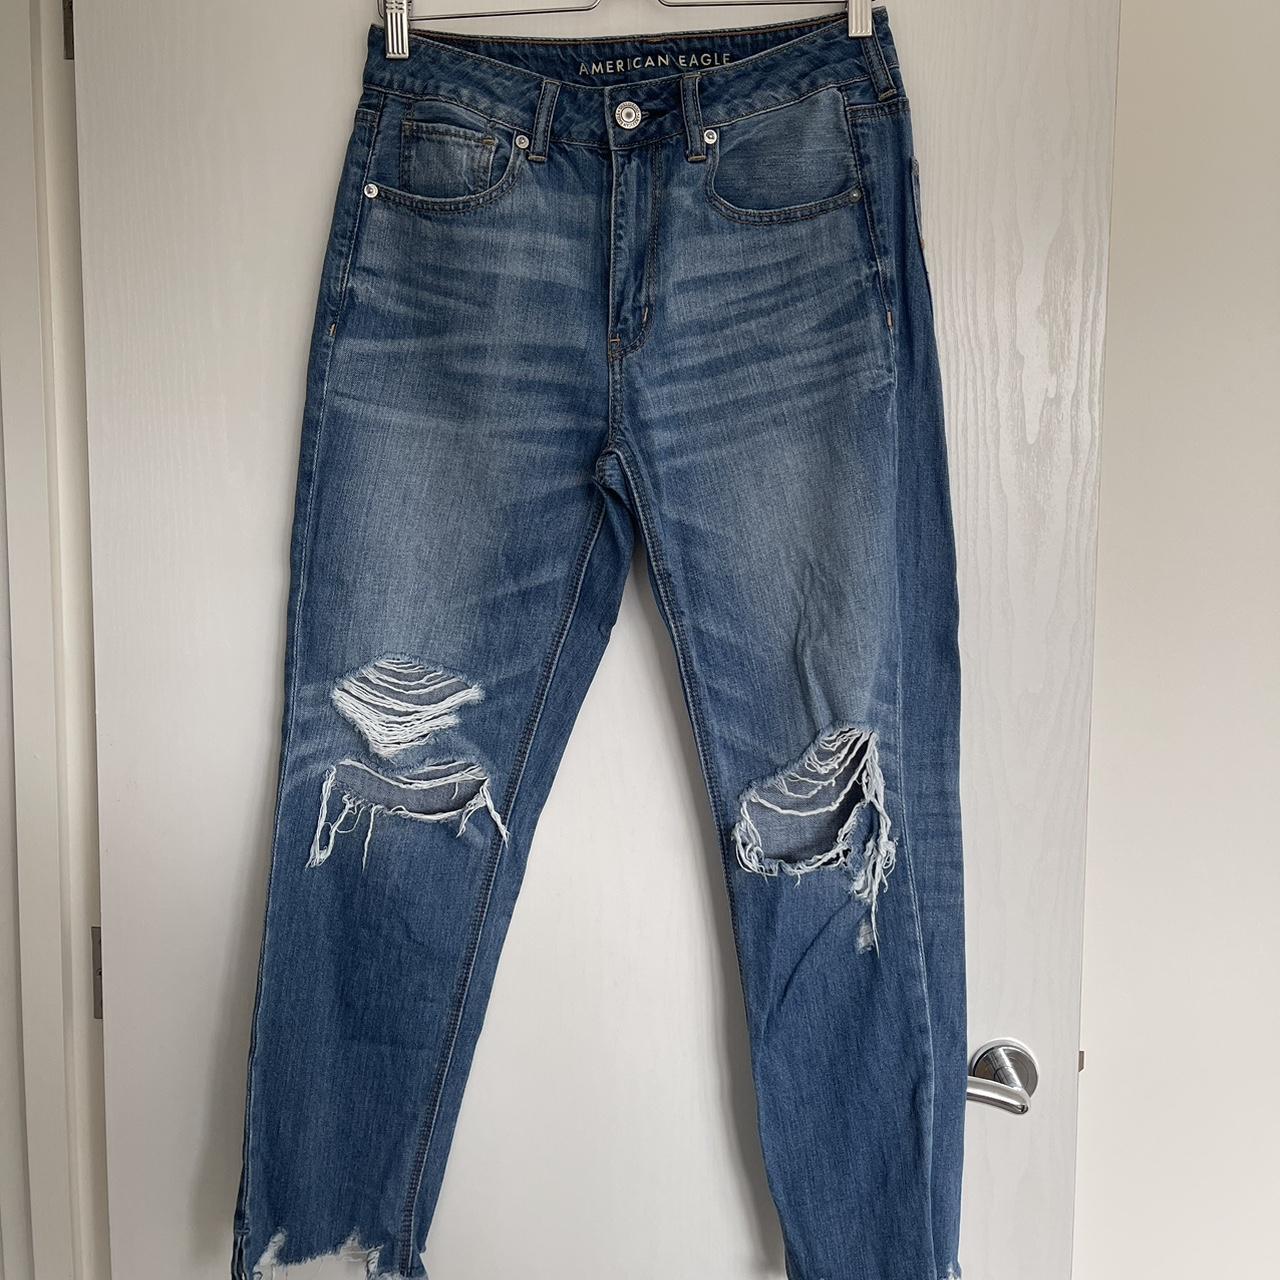 American Eagle Outfitters Women's Blue and Navy Jeans | Depop